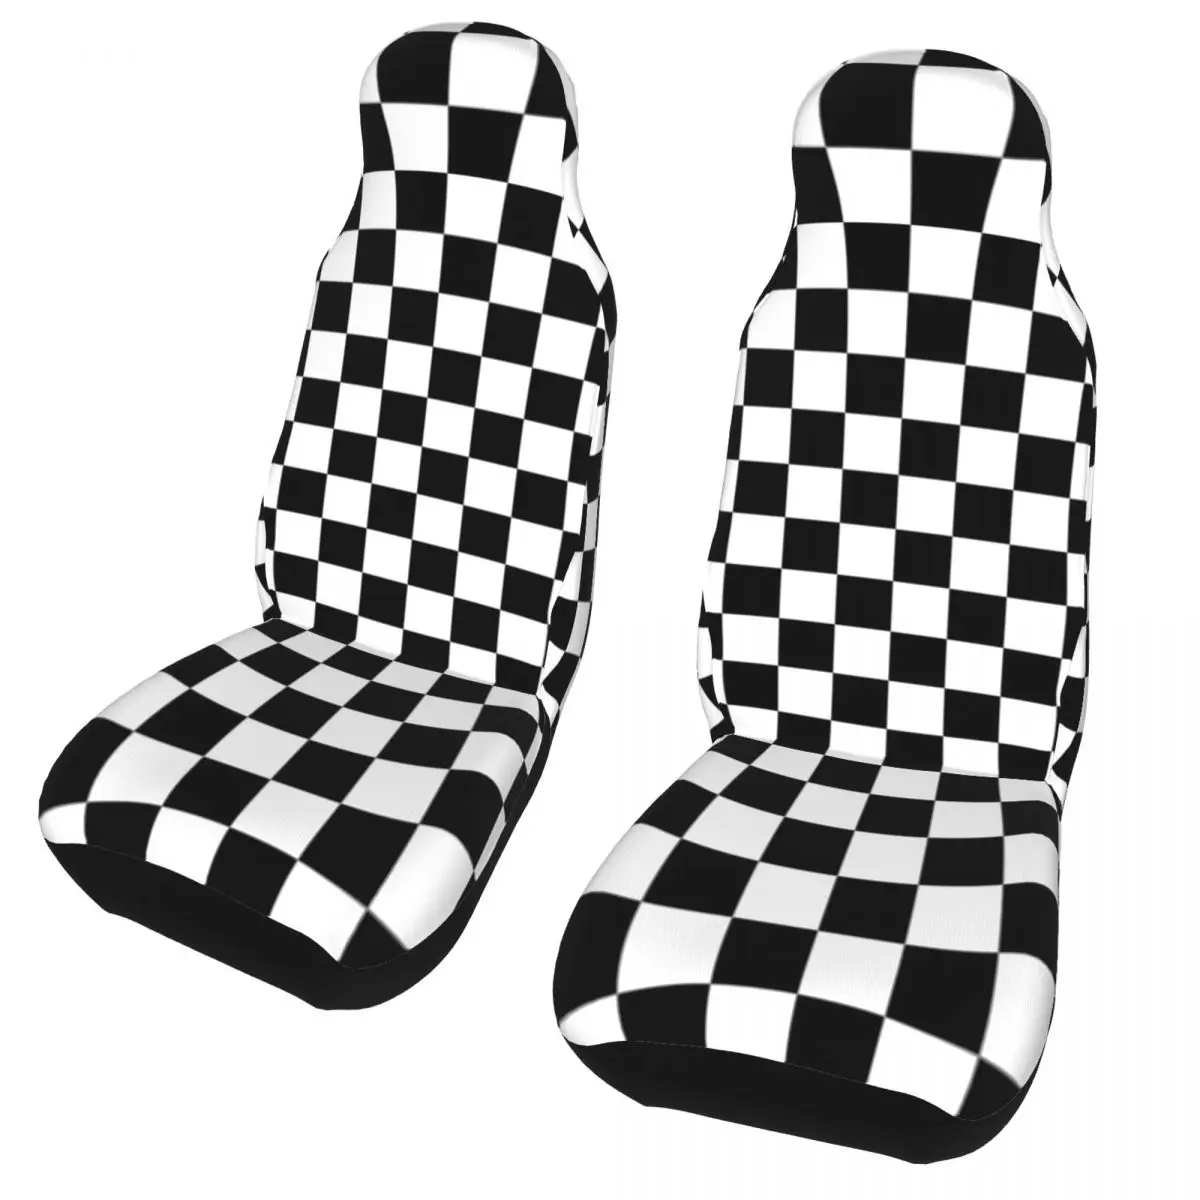 

Black And White Checkerboard Pattern Universal Auto Car Seat Covers Universal Fit for SUV Tartan Bucket Seat Protector Cover 2PC